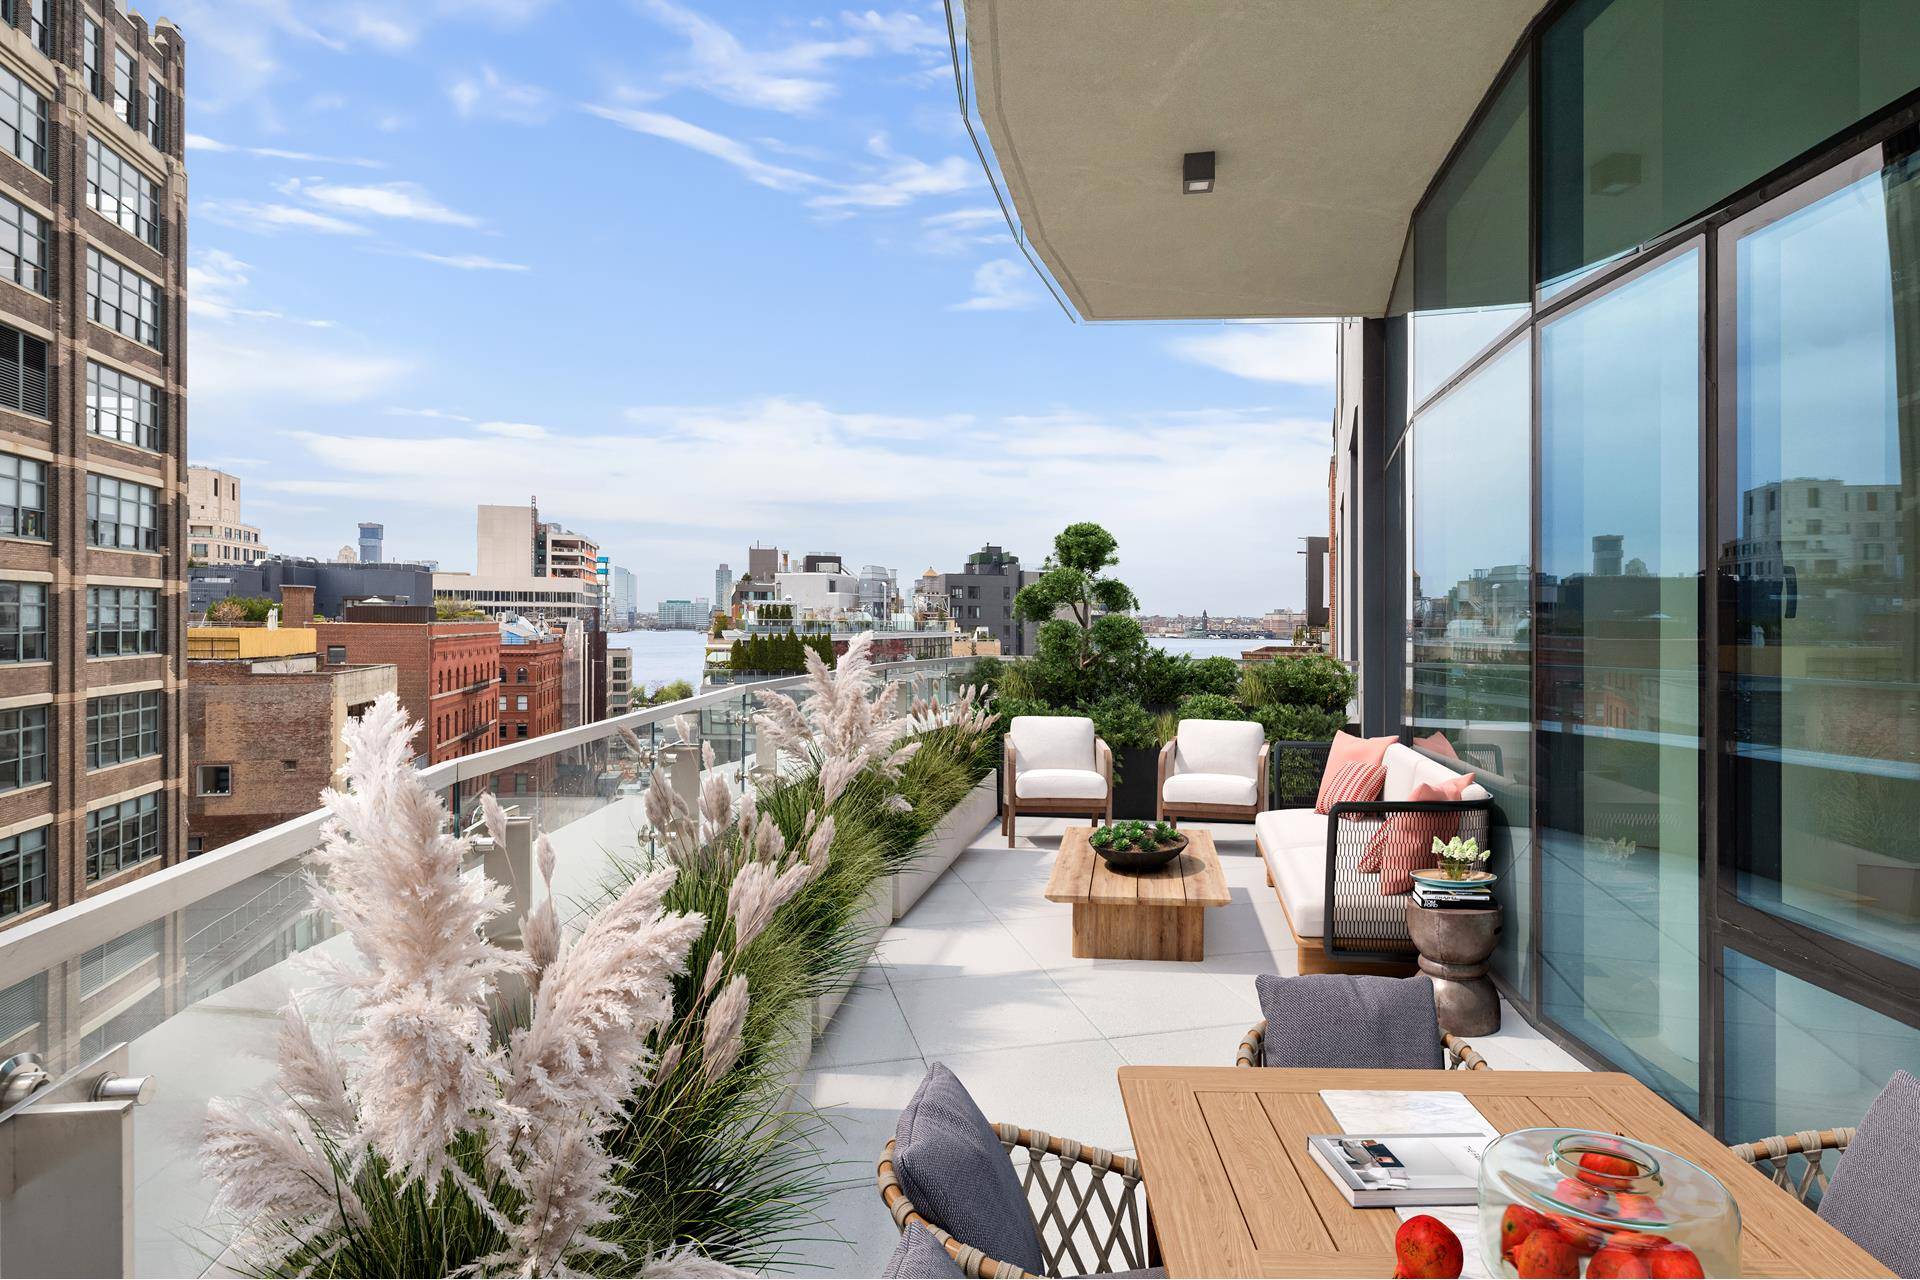 Introducing Penthouse 8 at The Riverview, a new boutique residential condominium with architecture and interiors by award winning Rawlings Architects, located at the crossroads of TriBeCa, the West Village, and ...